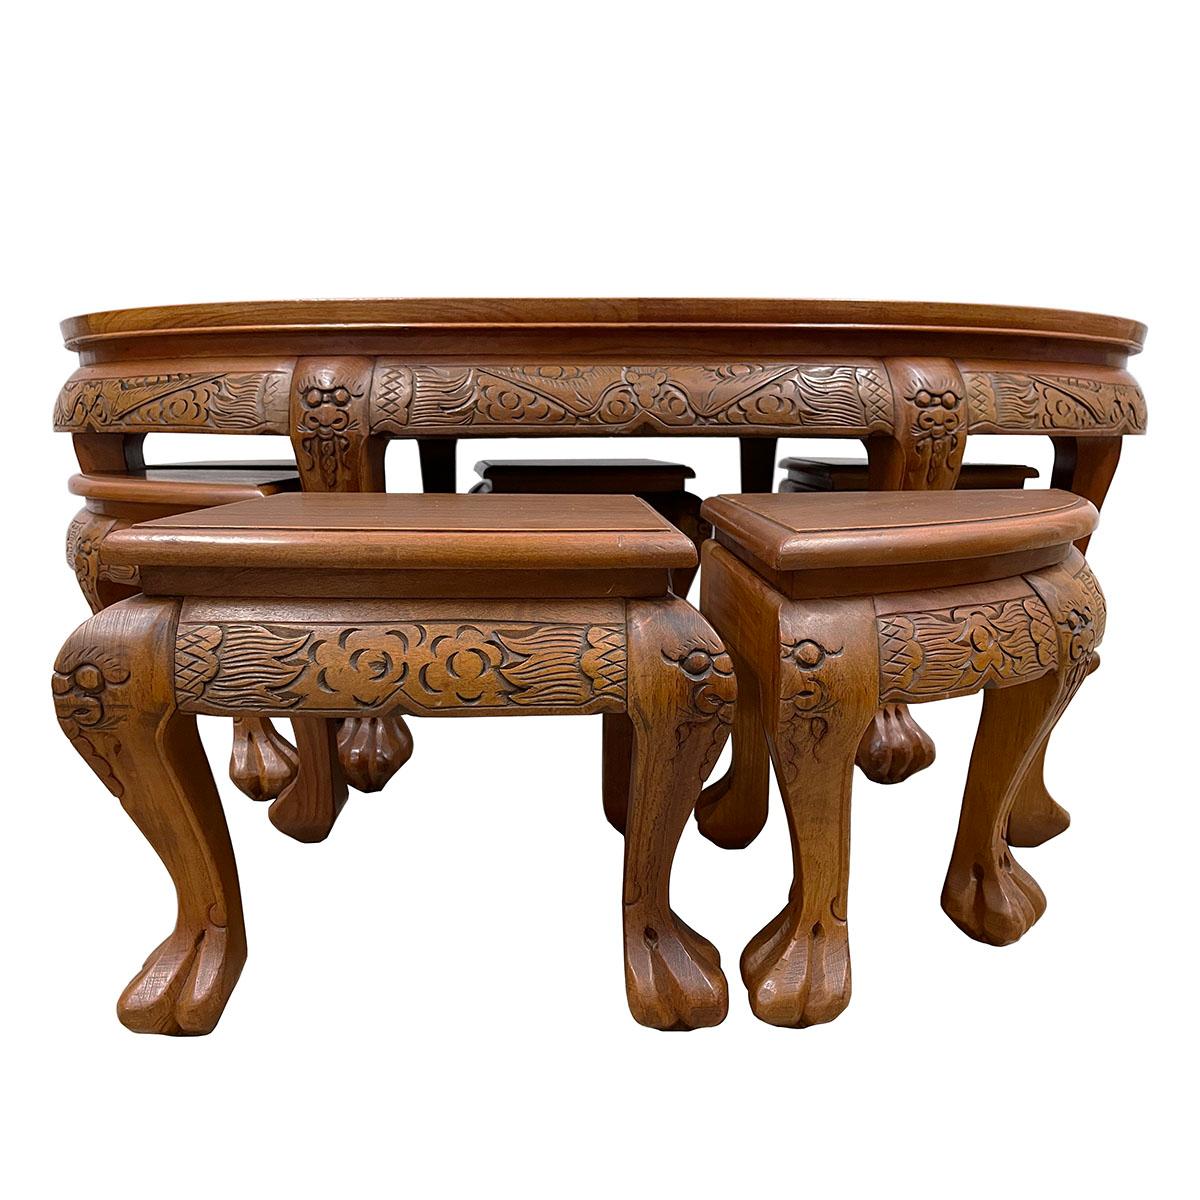 Vintage Chinese Massive Carved Teak Wood Coffee Table with 6 Nesting Stools 2